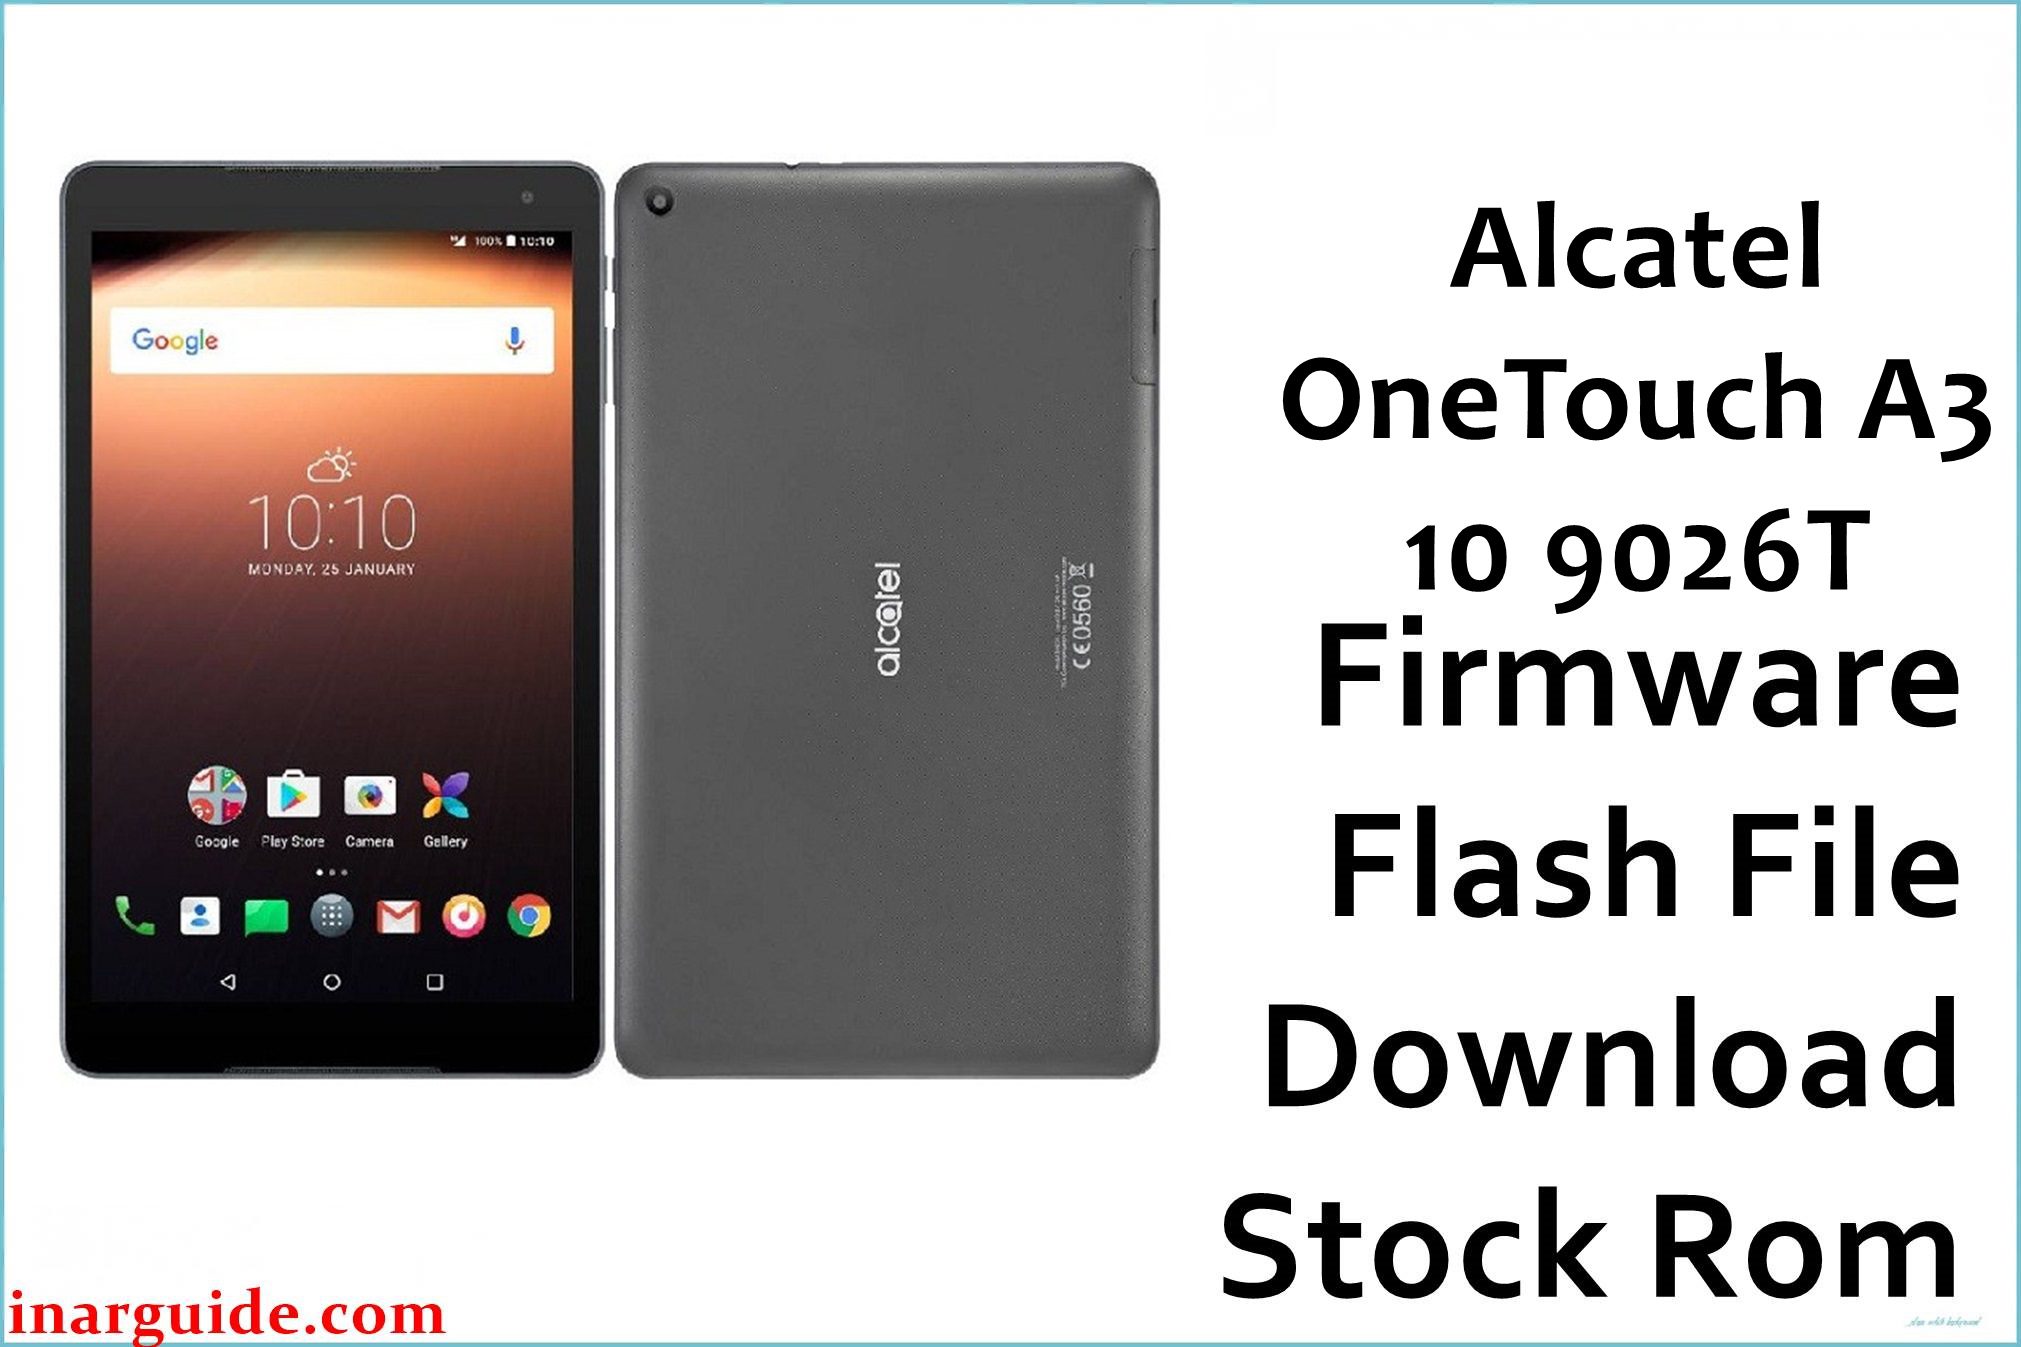 Alcatel OneTouch A3 10 9026T